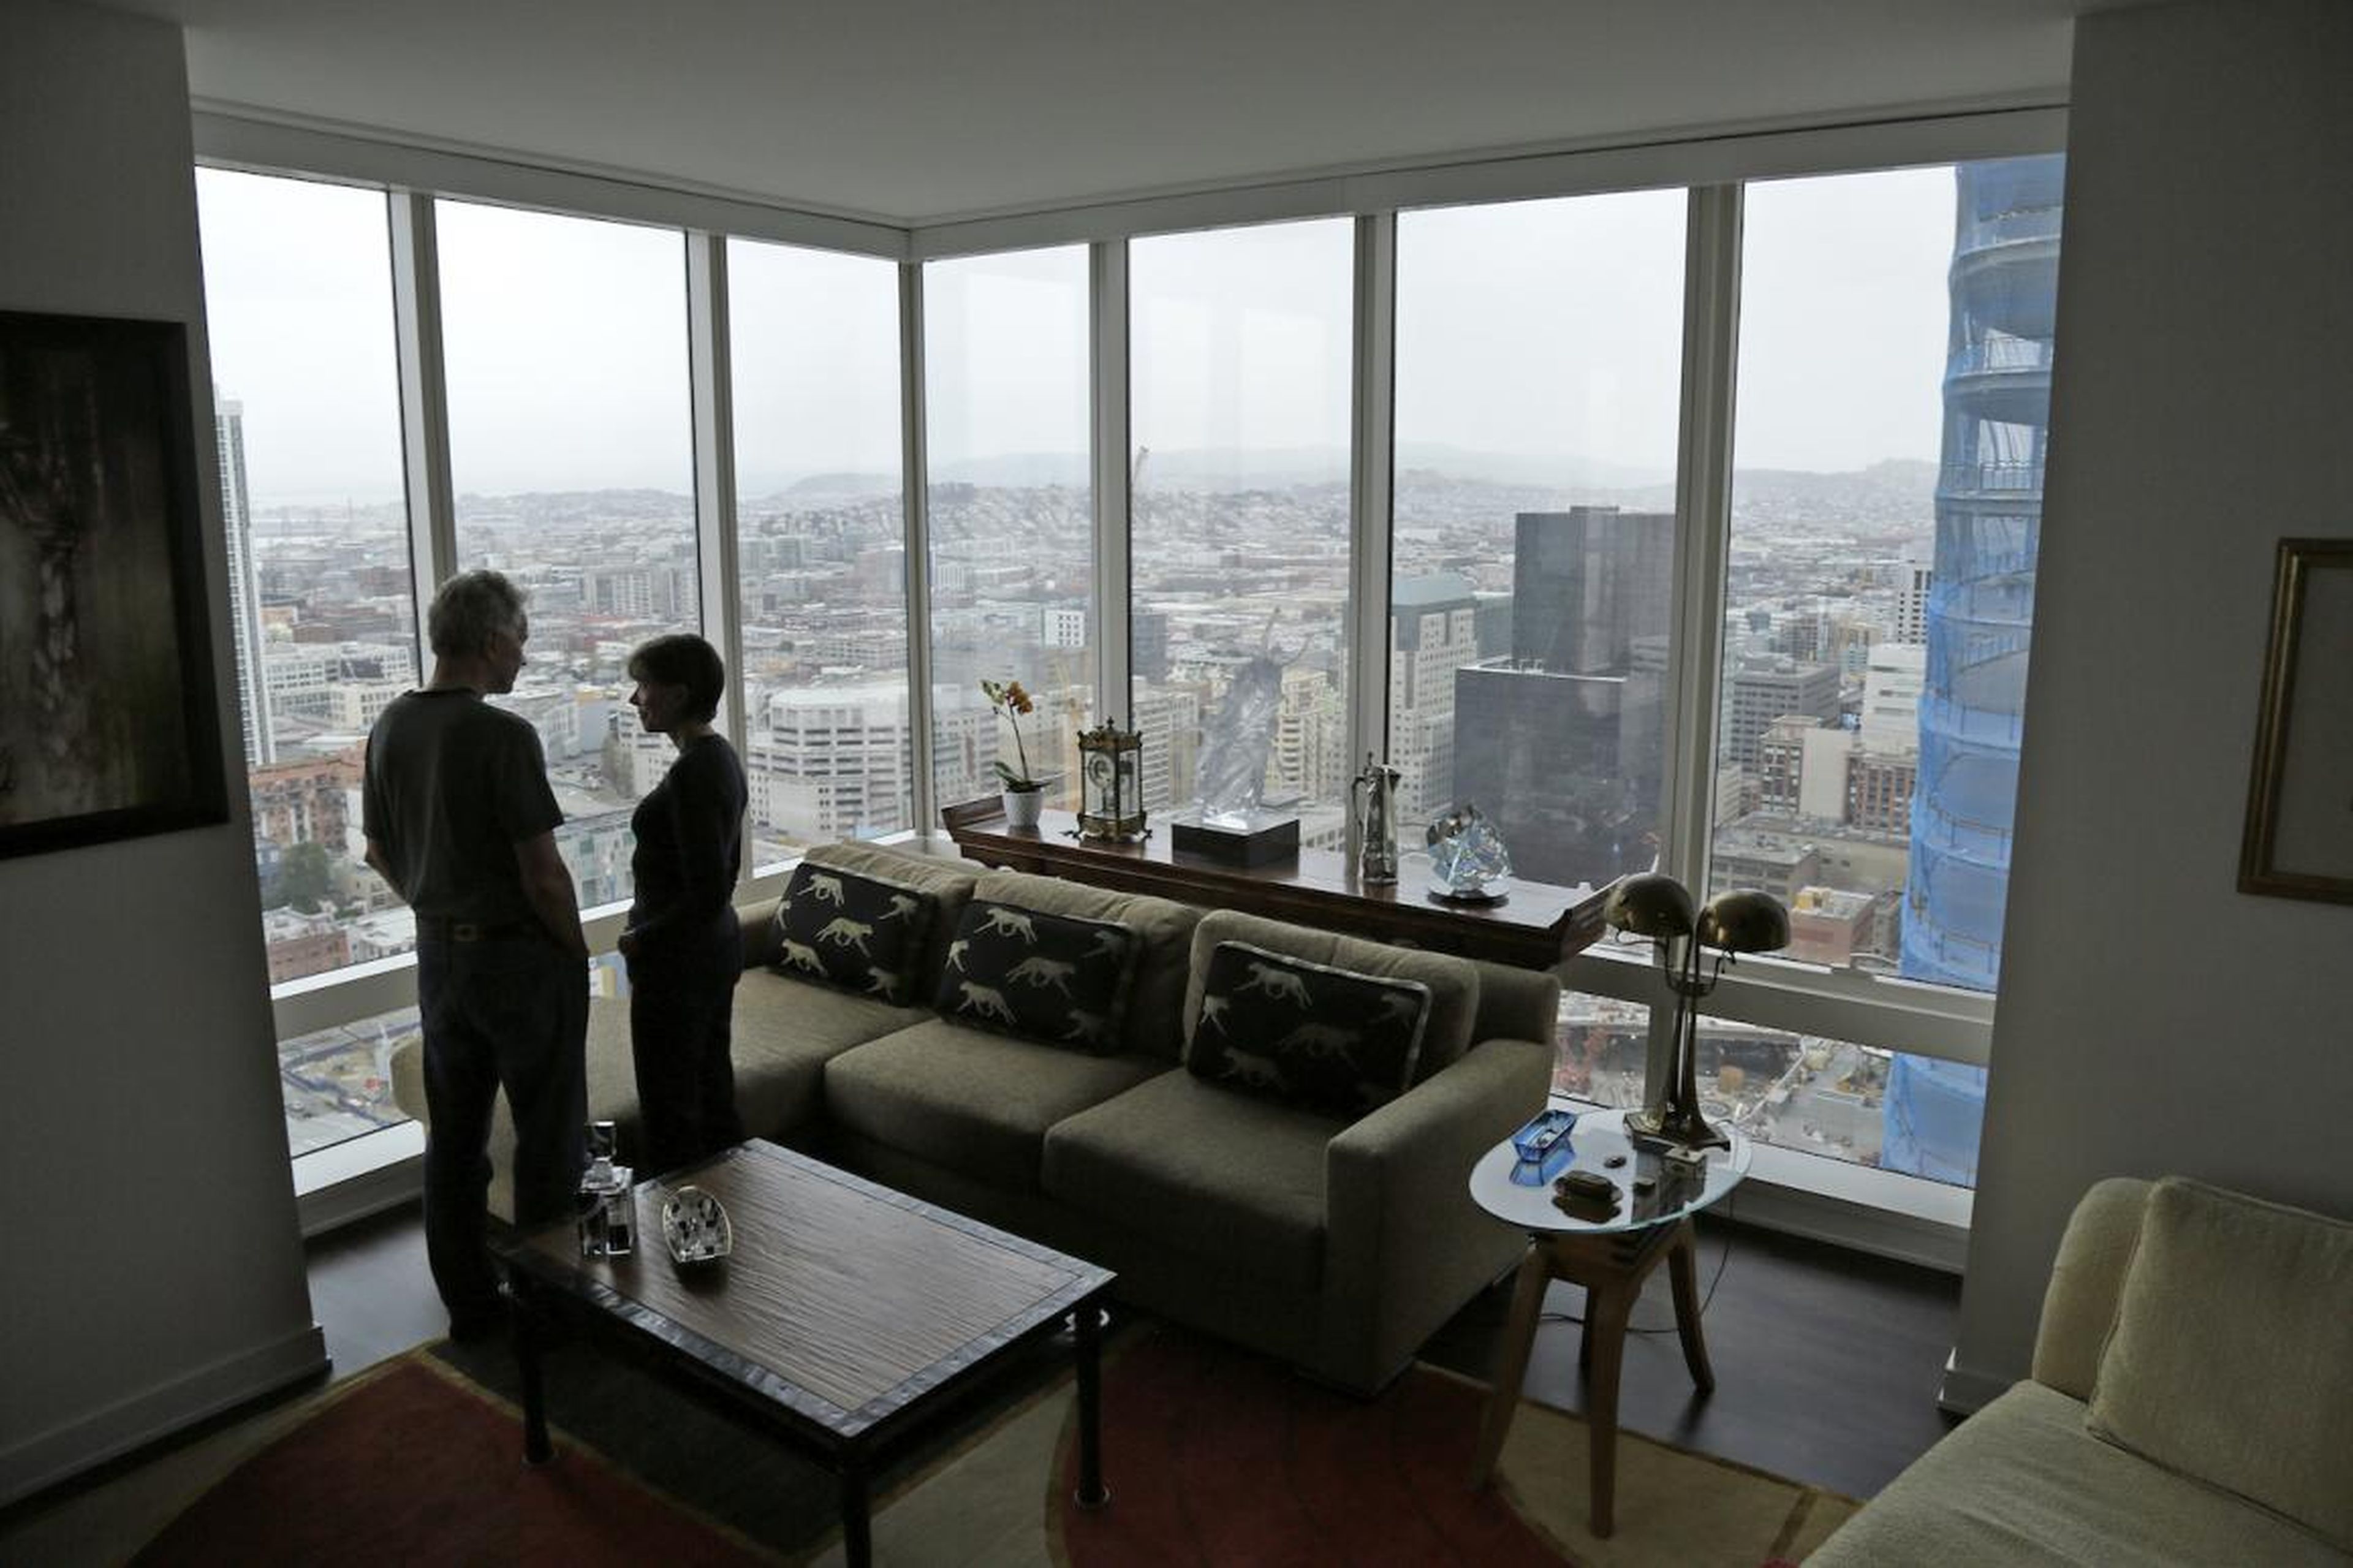 Jerry Dodson and his wife, Pat, inside their home on the 42nd floor of Millennium Tower.